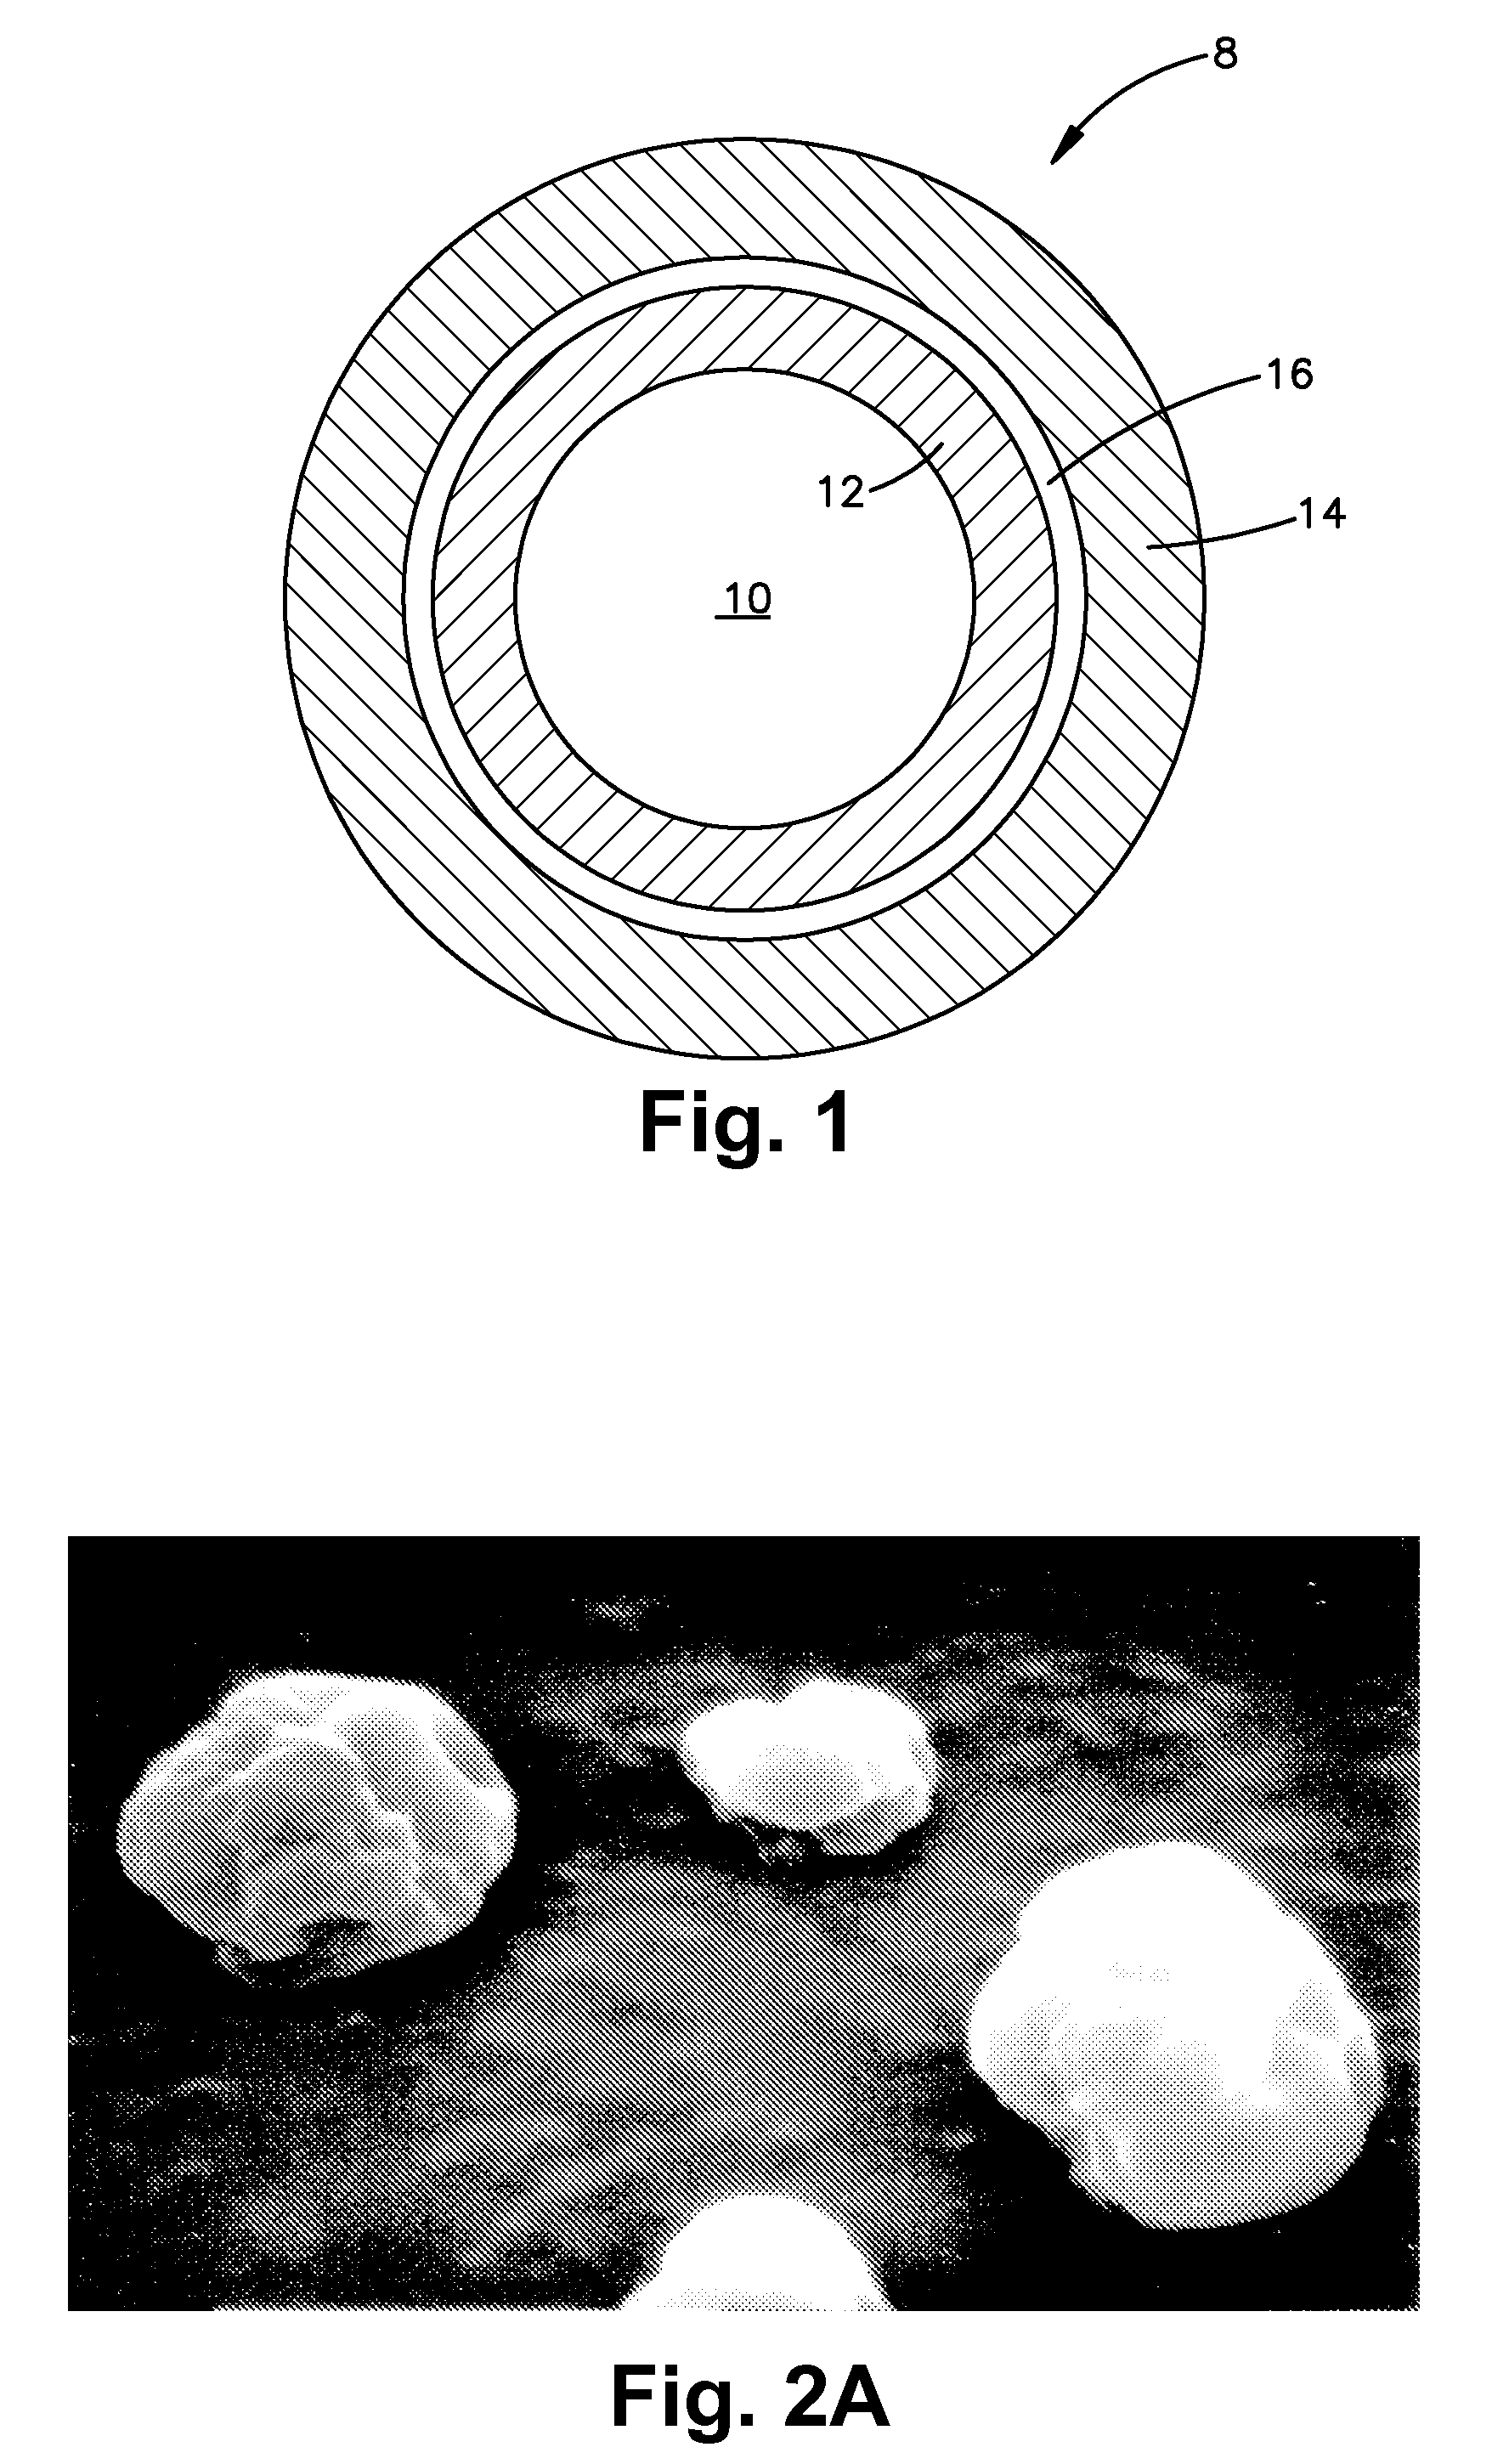 Microencapsulated Oil Product and Method of Making Same